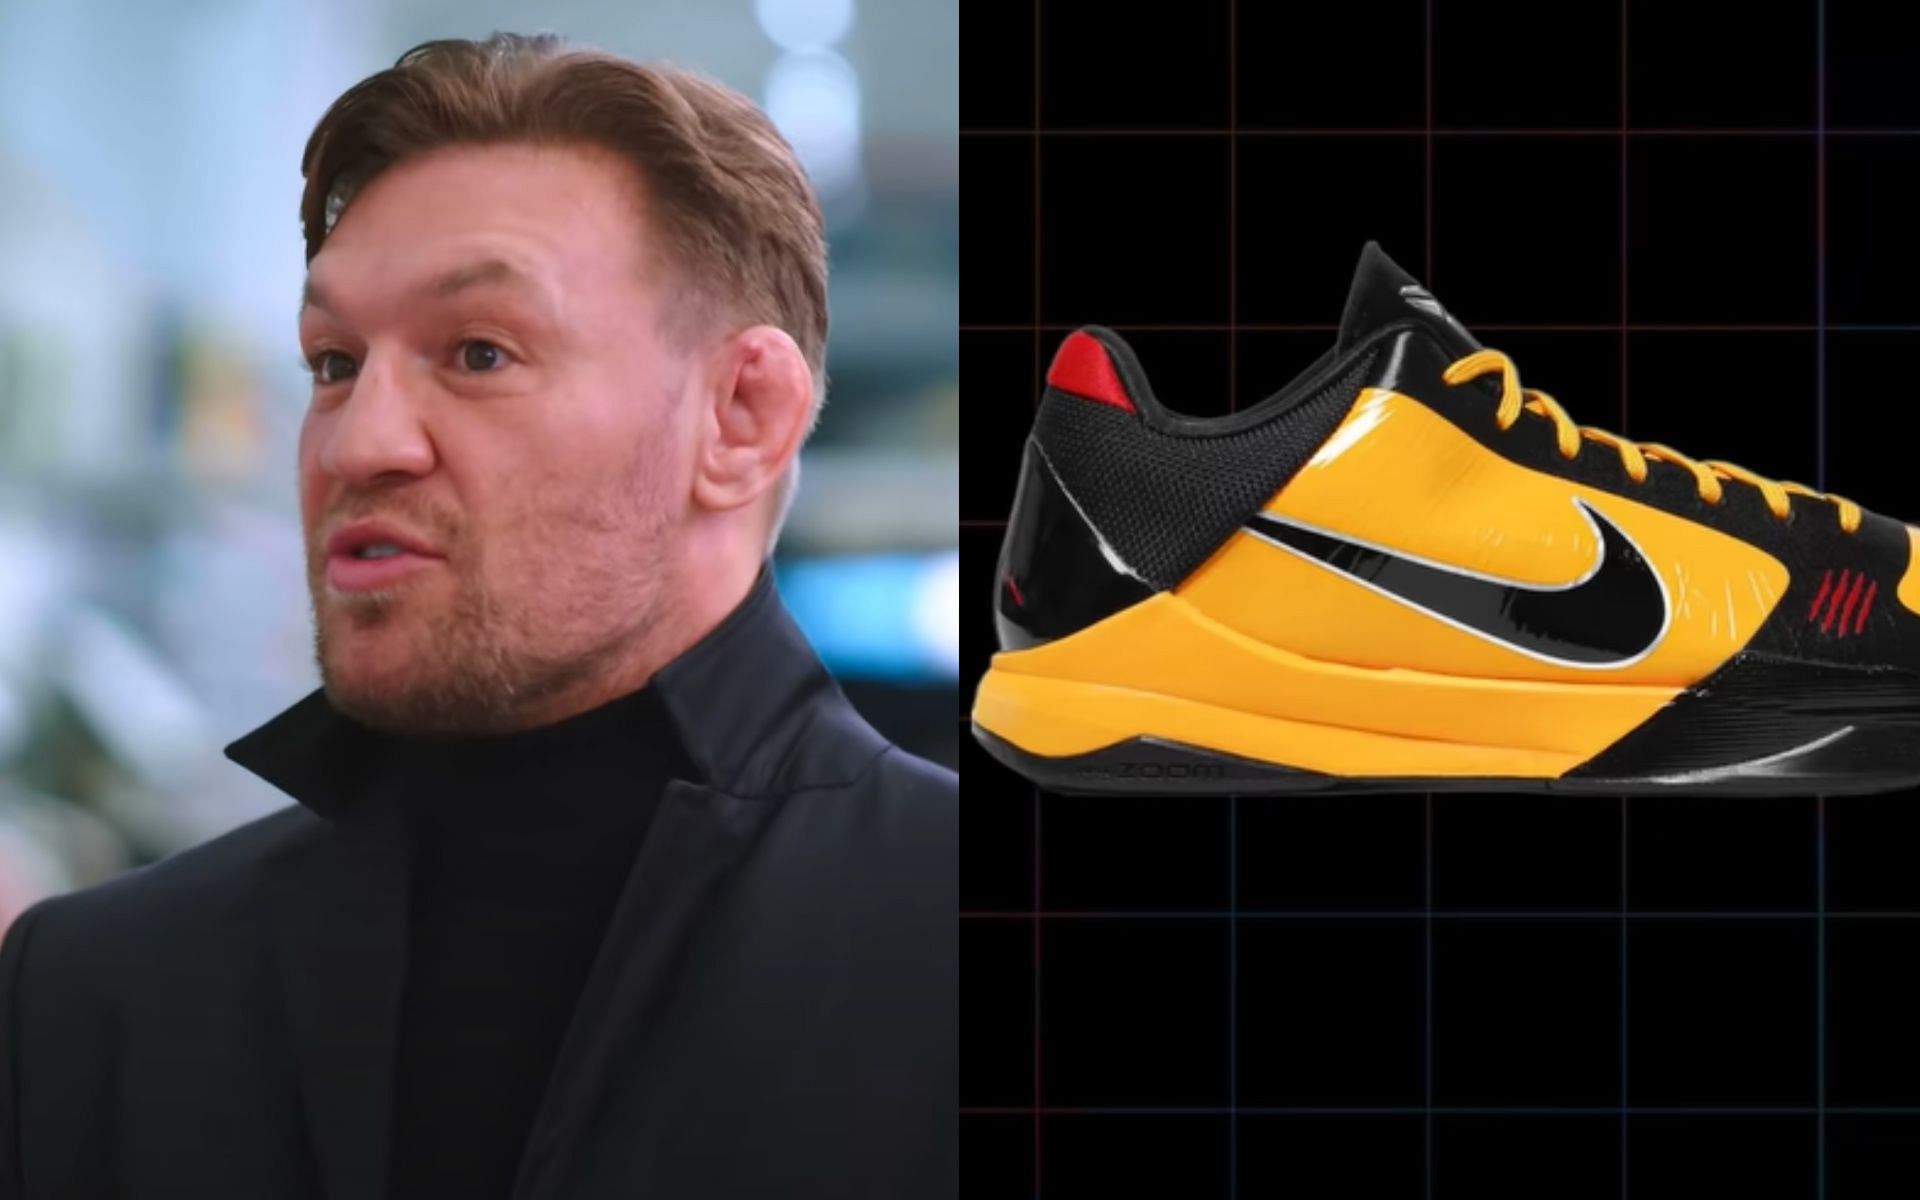 Conor McGregor (L) owns a pair of Bruce Lee Nike shoes (R). [Image via @Complex on YouTube]